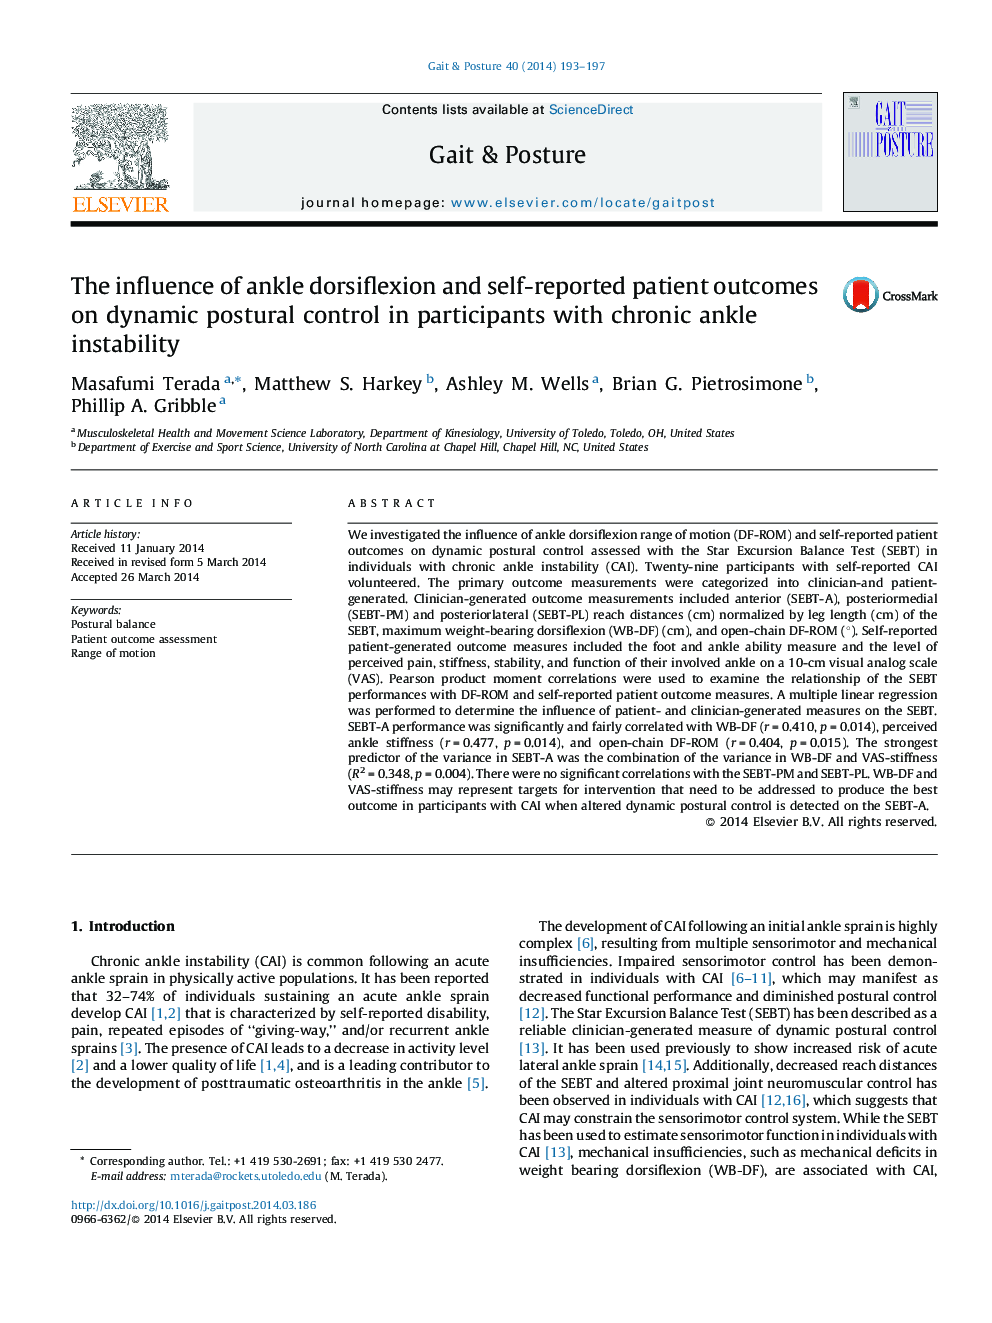 The influence of ankle dorsiflexion and self-reported patient outcomes on dynamic postural control in participants with chronic ankle instability